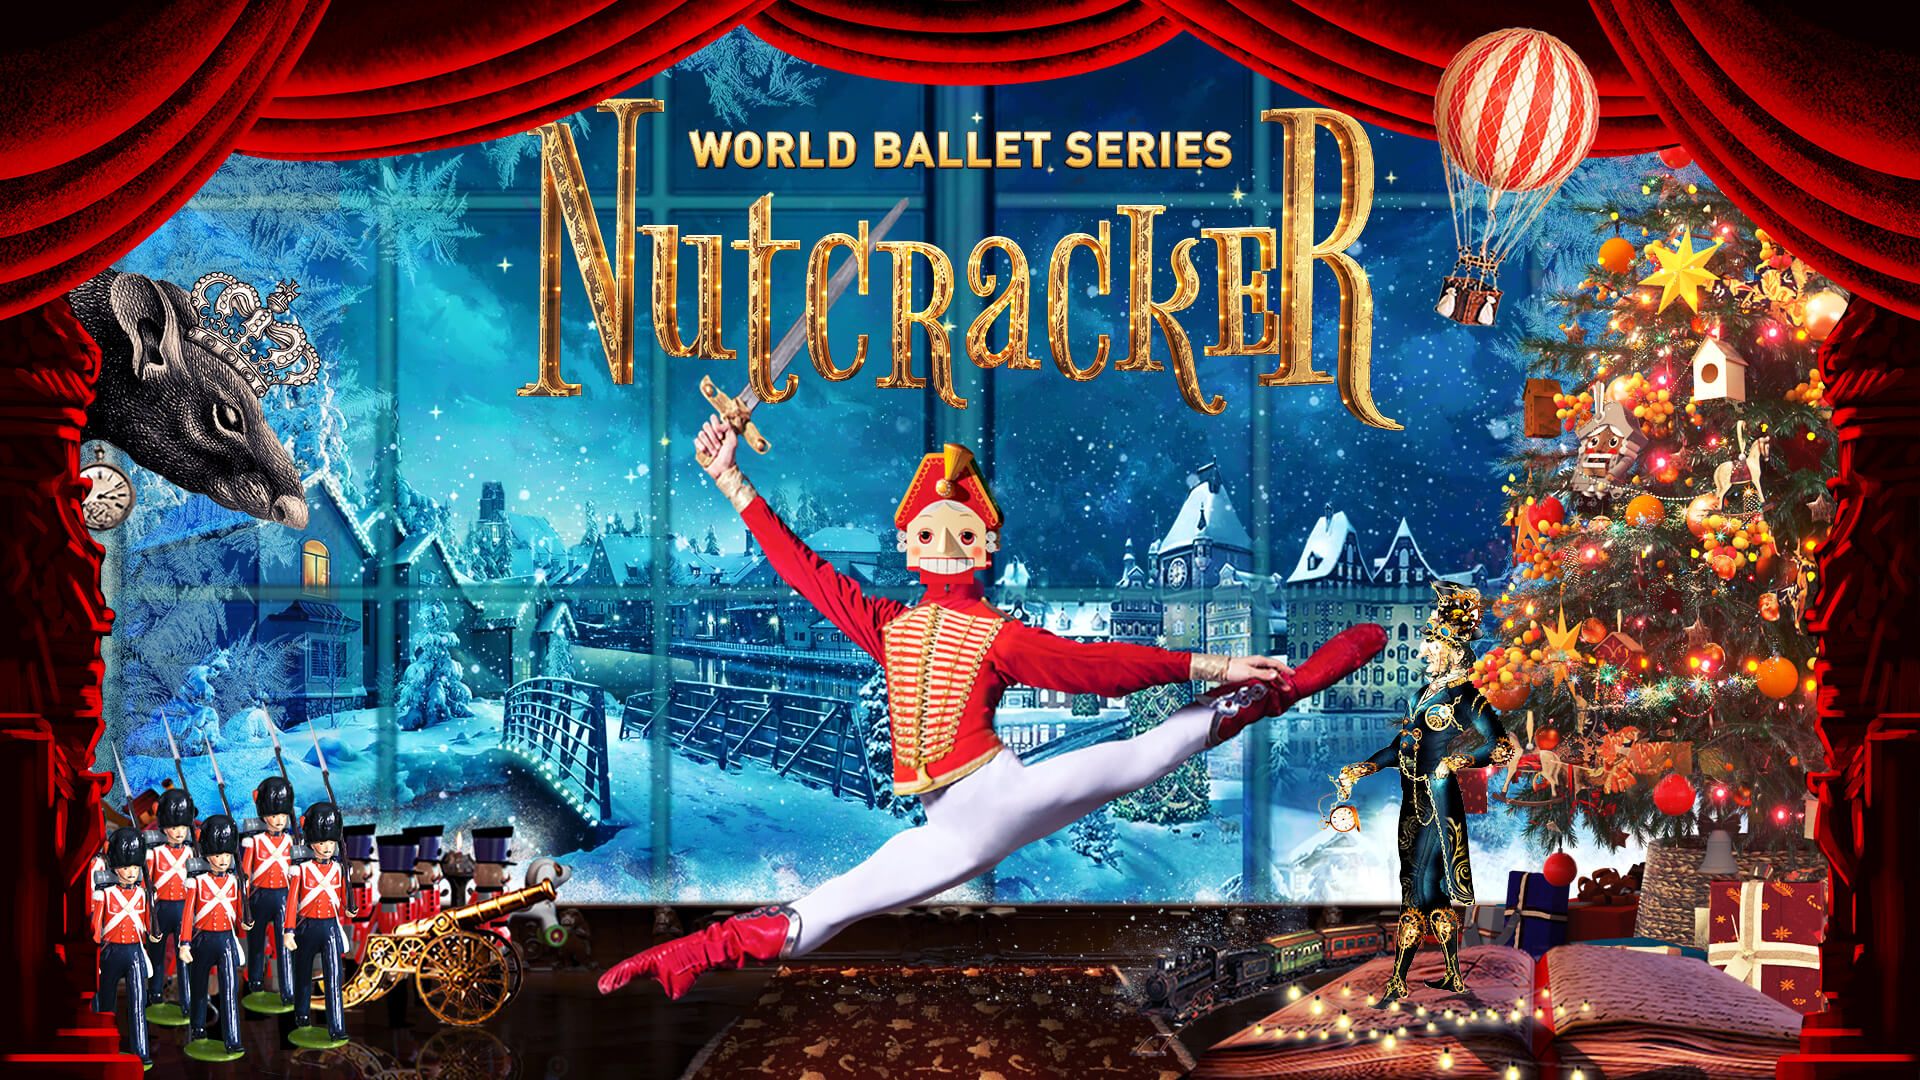 World Ballet Series: Nutcracker at the Palace Theater